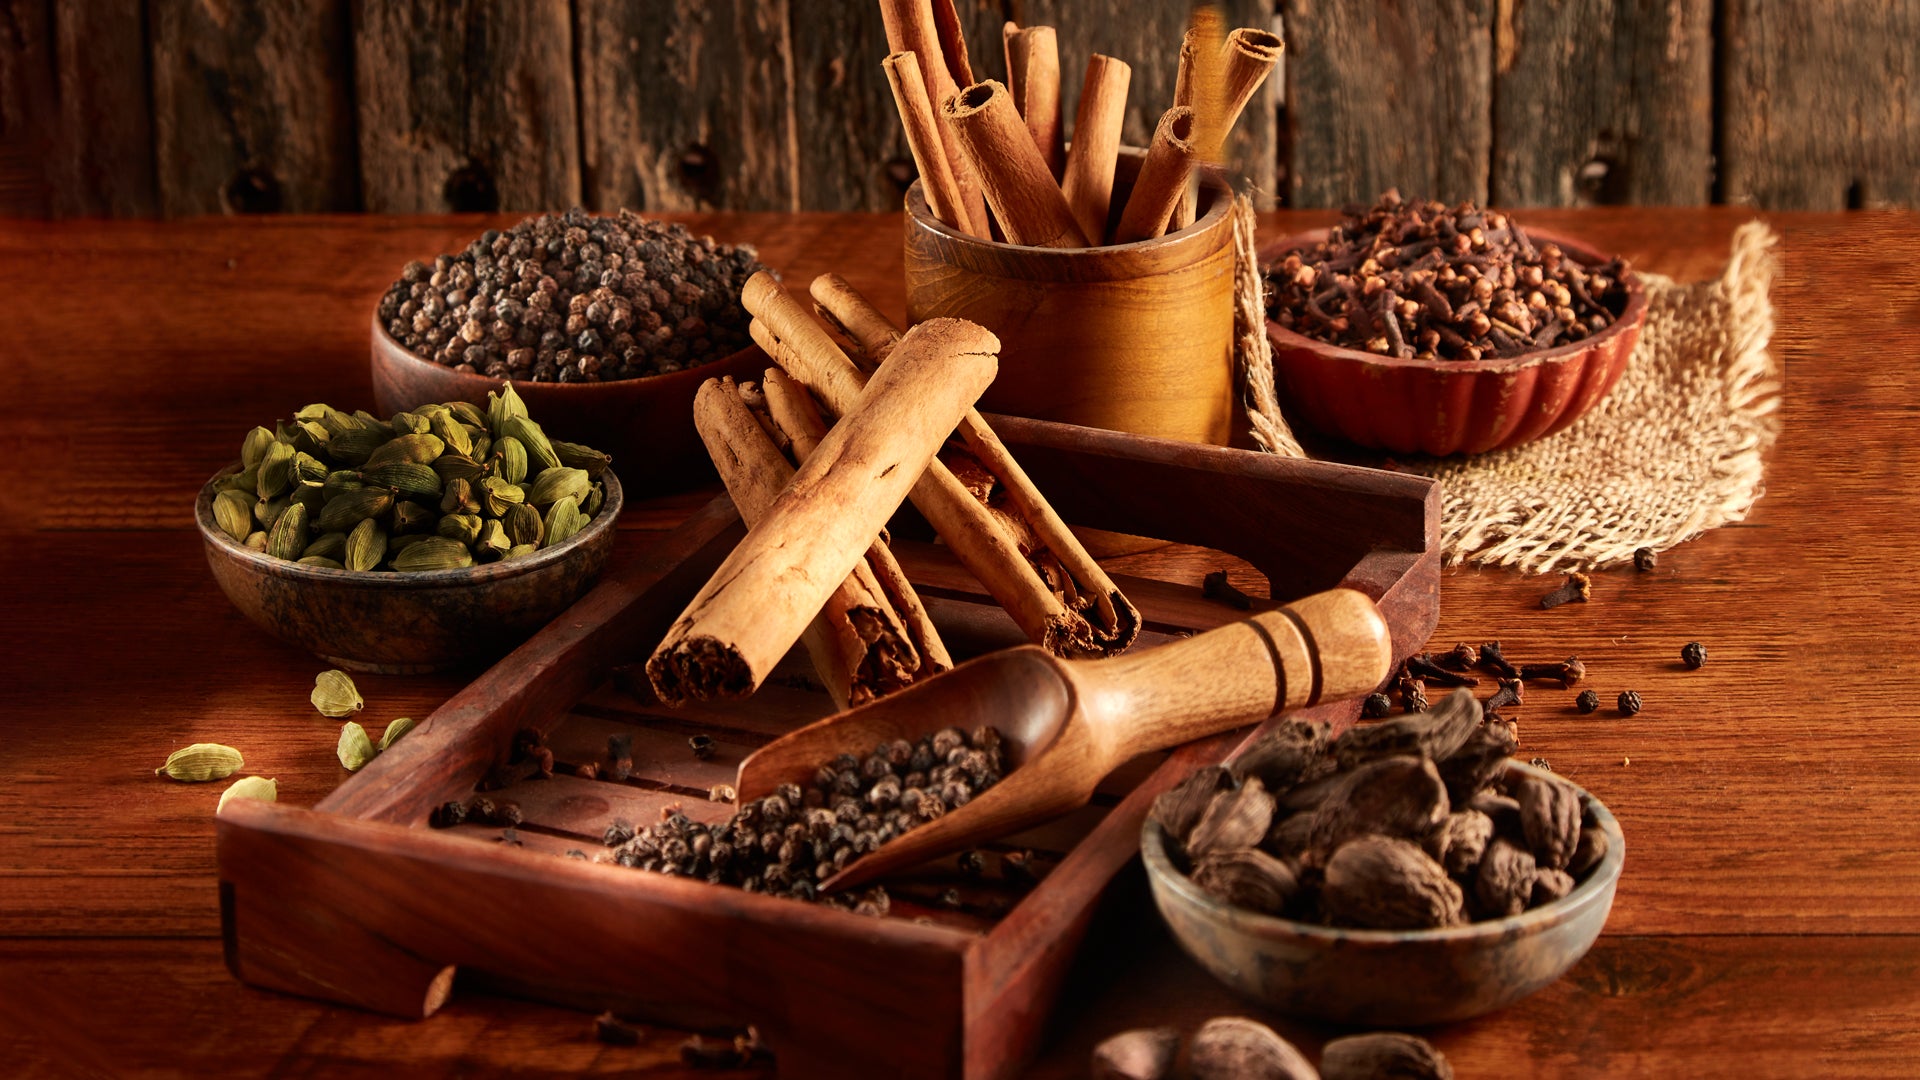 MUST HAVE EXOTIC SPICES IN YOUR SPICE RACK